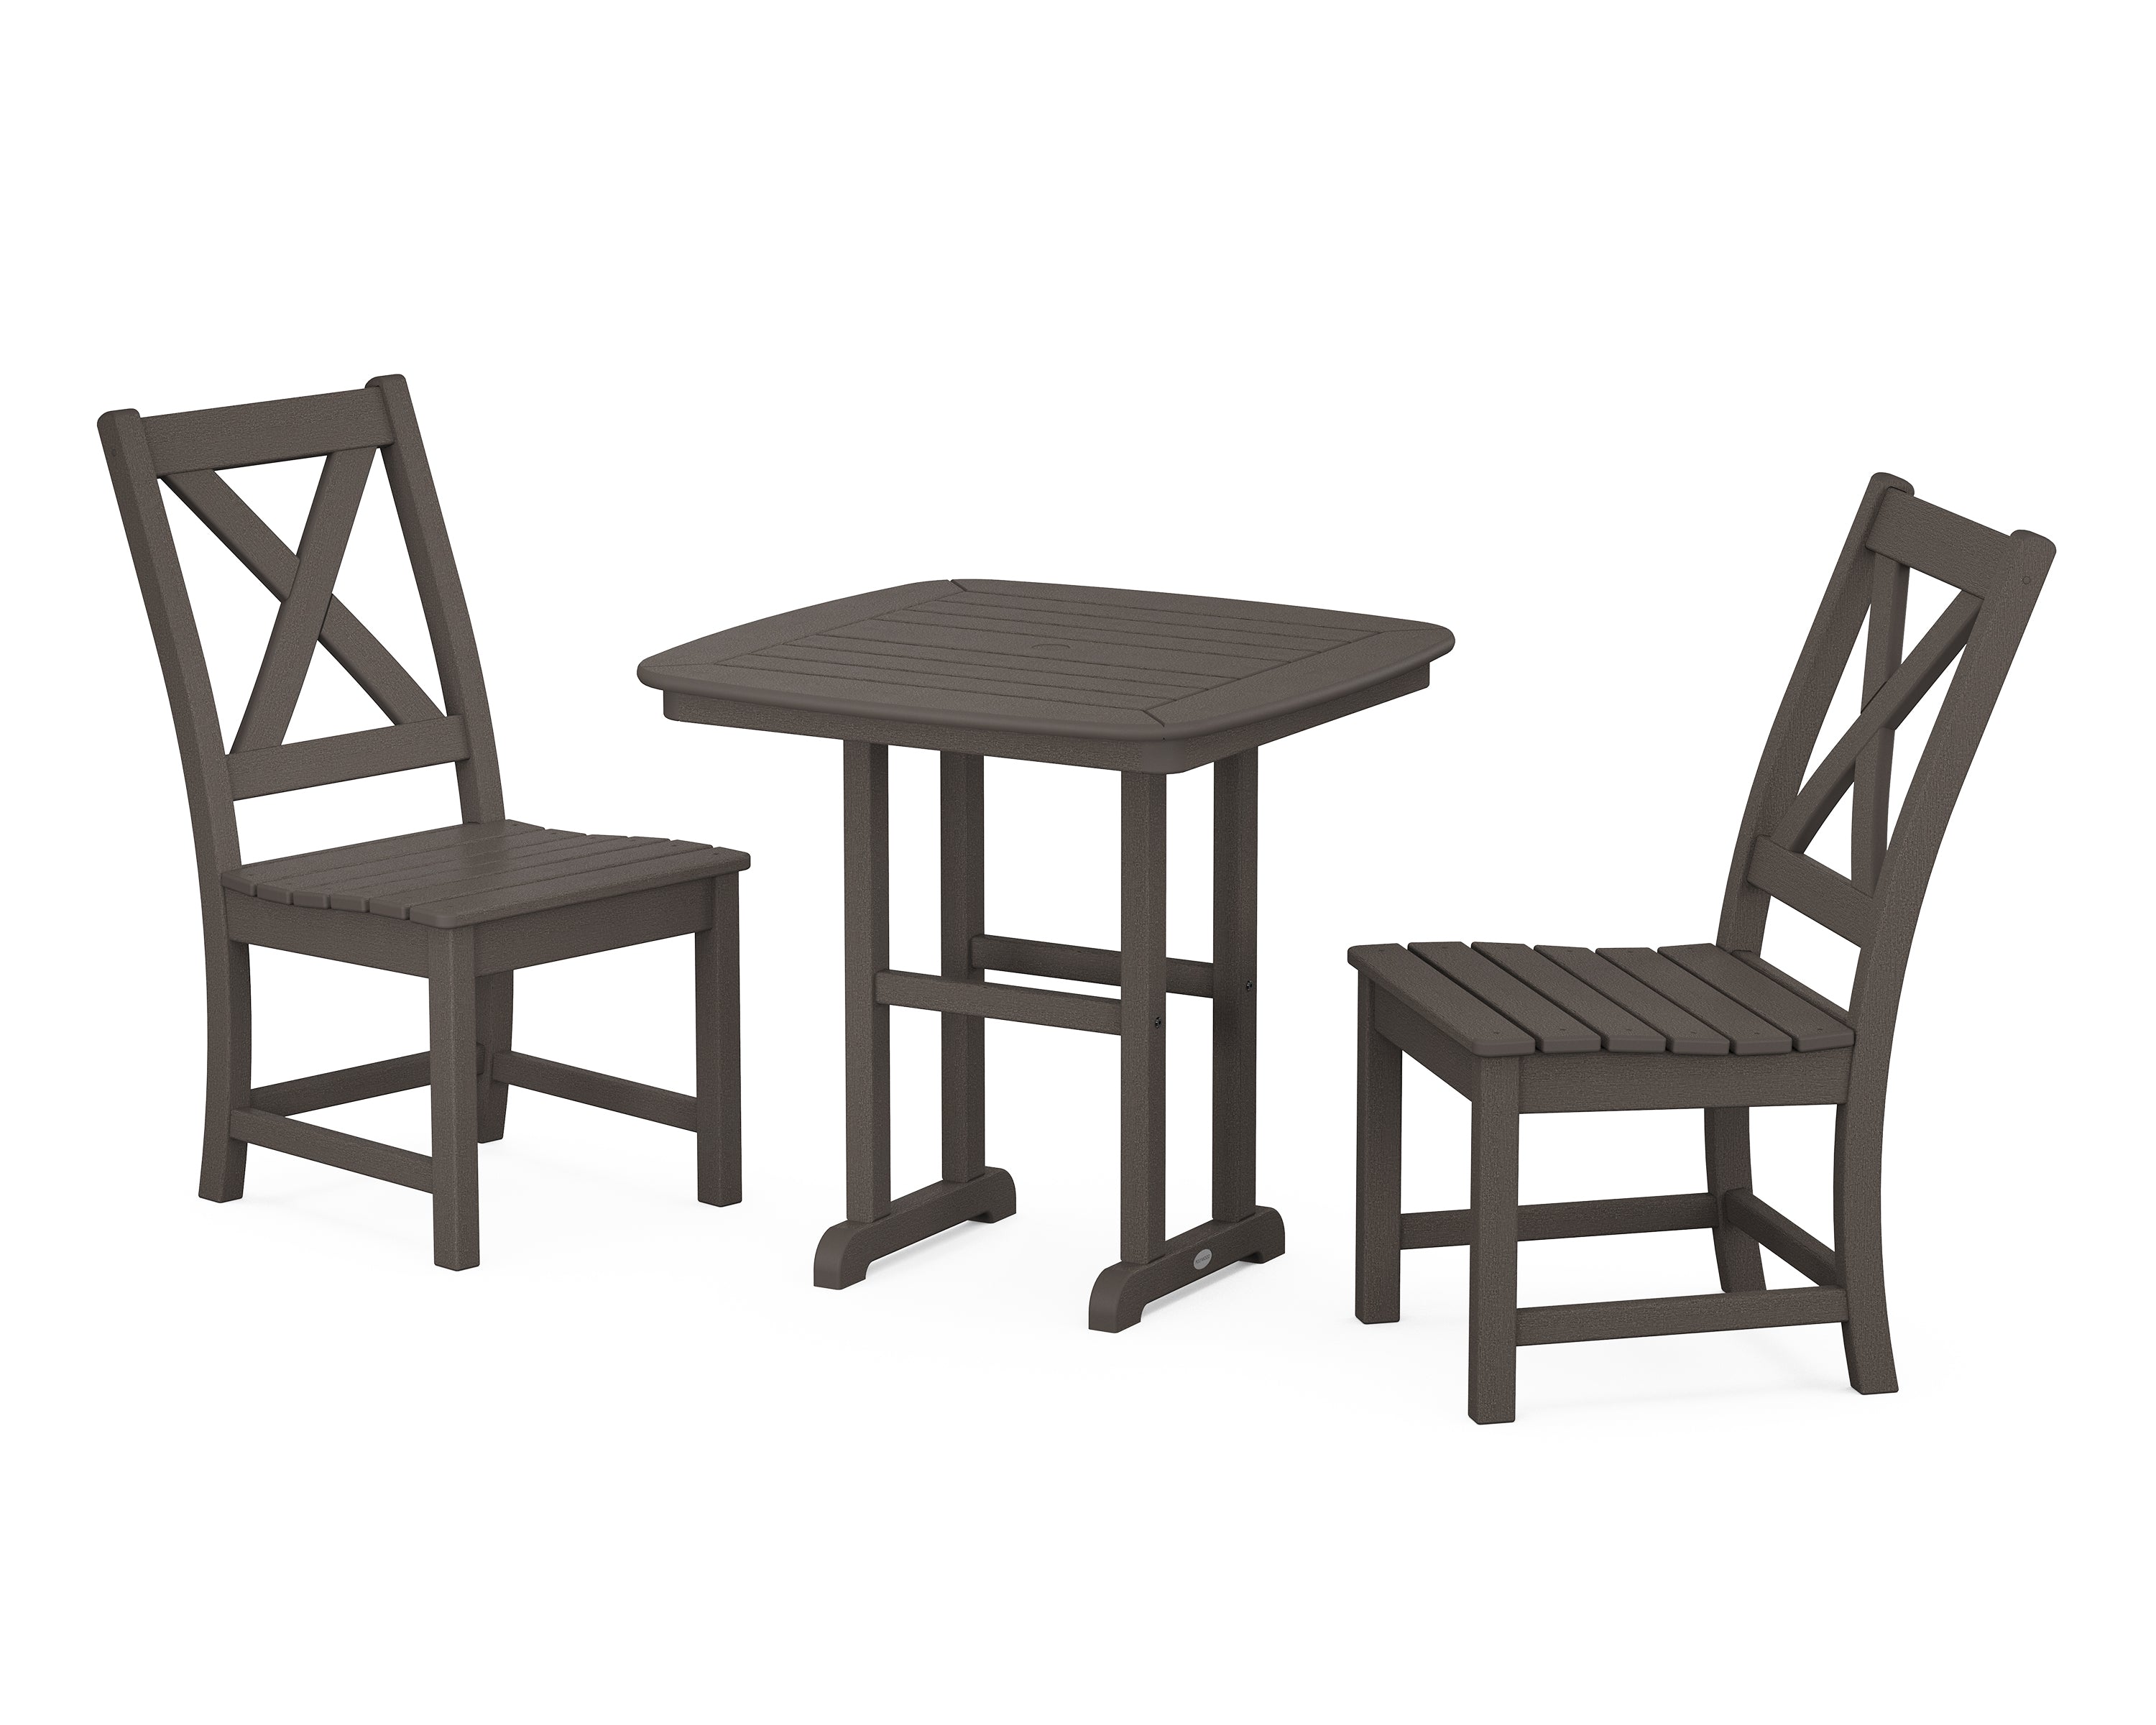 POLYWOOD® Braxton Side Chair 3-Piece Dining Set in Vintage Coffee